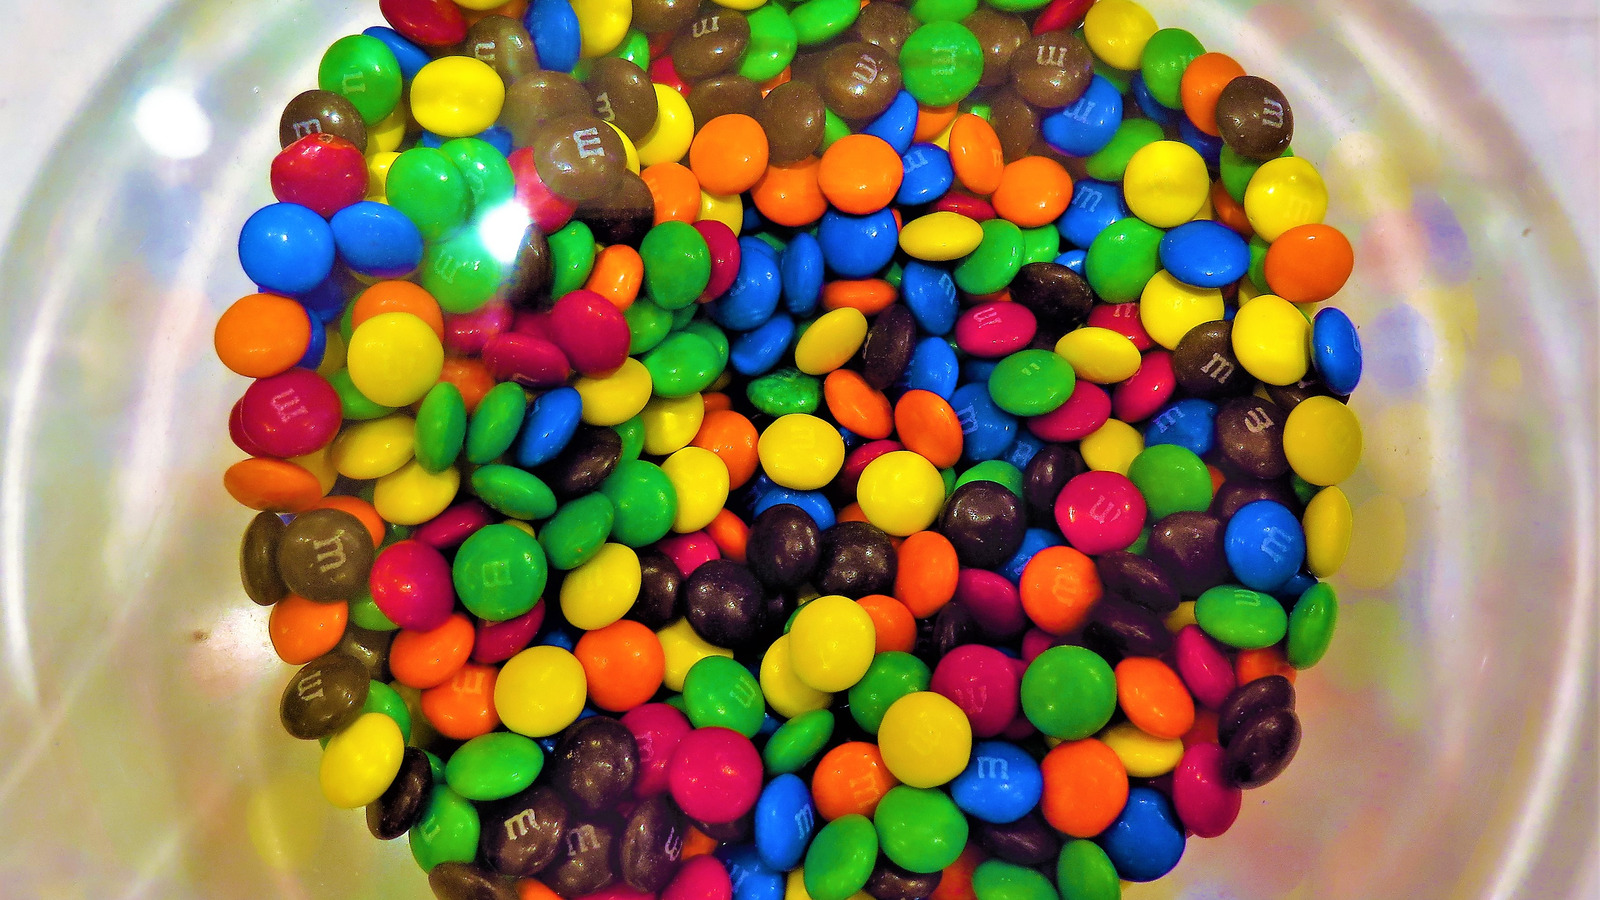 Why are the six M&M colors not in equal proportions? - Quora